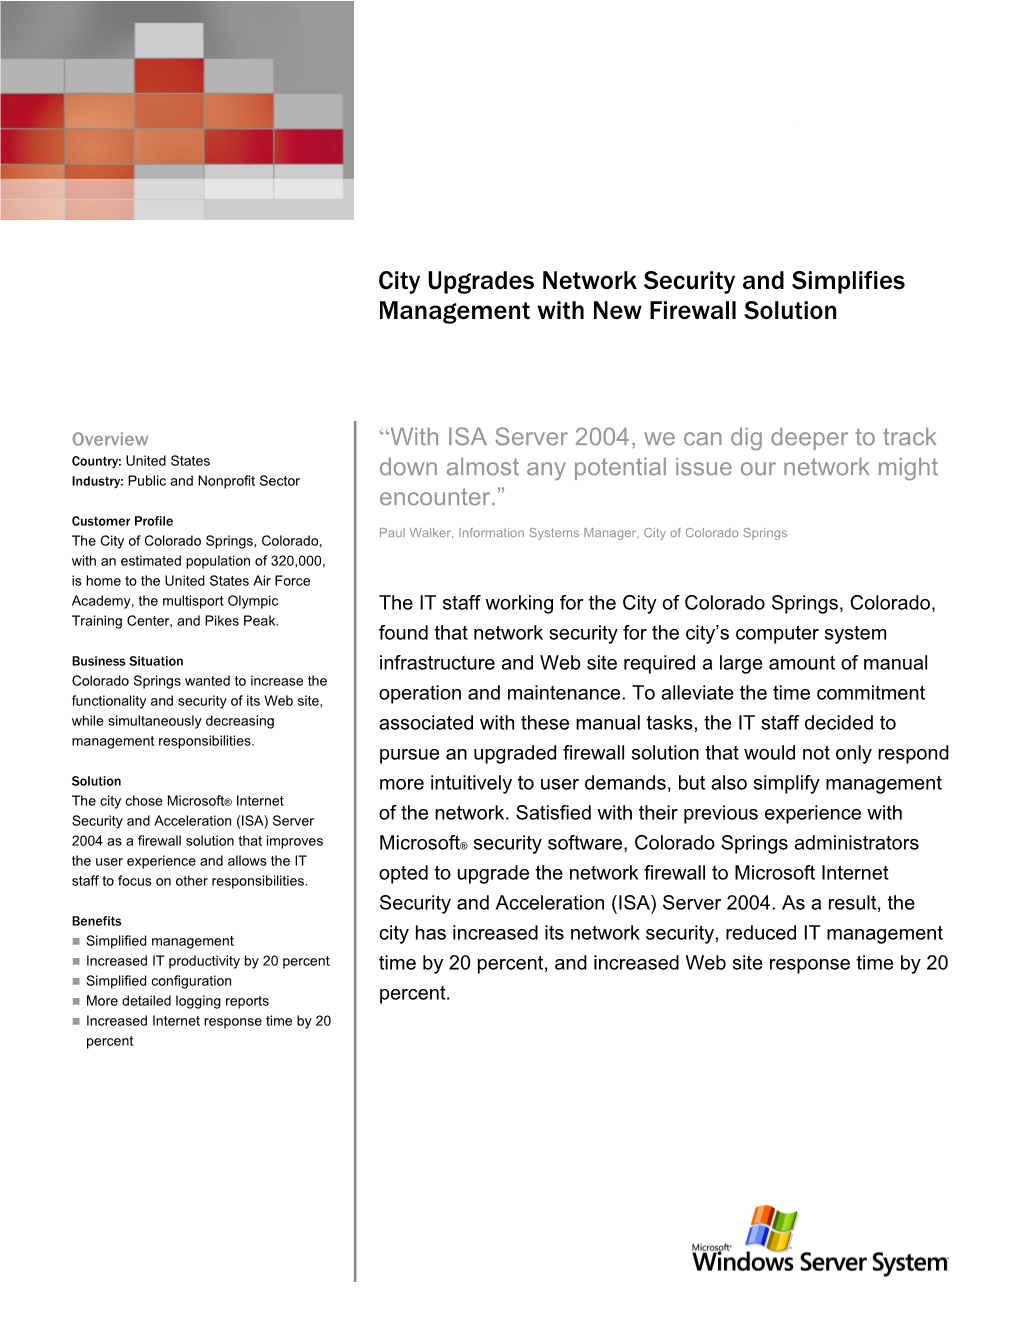 City Upgrades Network Security and Simplifies Management with New Firewall Solution